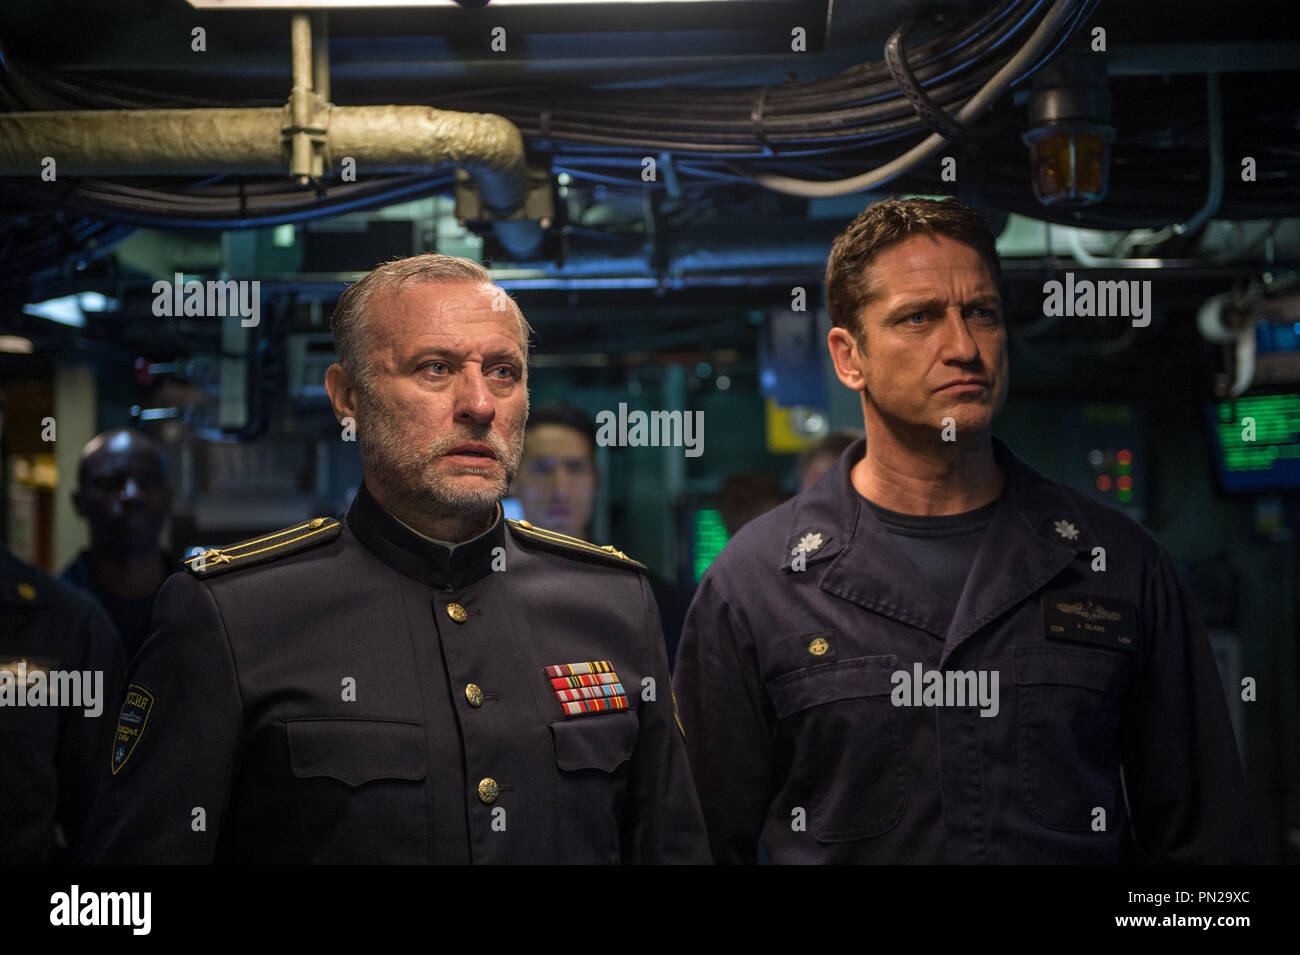 RELEASE DATE: October 26, 2018 TITLE: Hunter Killer STUDIO: Summit Entertainment DIRECTOR: Donovan Marsh PLOT: An untested American submarine captain teams with U.S. Navy Seals to rescue the Russian president, who has been kidnapped by a rogue general. STARRING: MICHAEL NYQVUIST as Captain Andropov, GERARD BUTLER as Captain Joe Glass. (Credit Image: © Summit Entertainment/Entertainment Pictures) Stock Photo